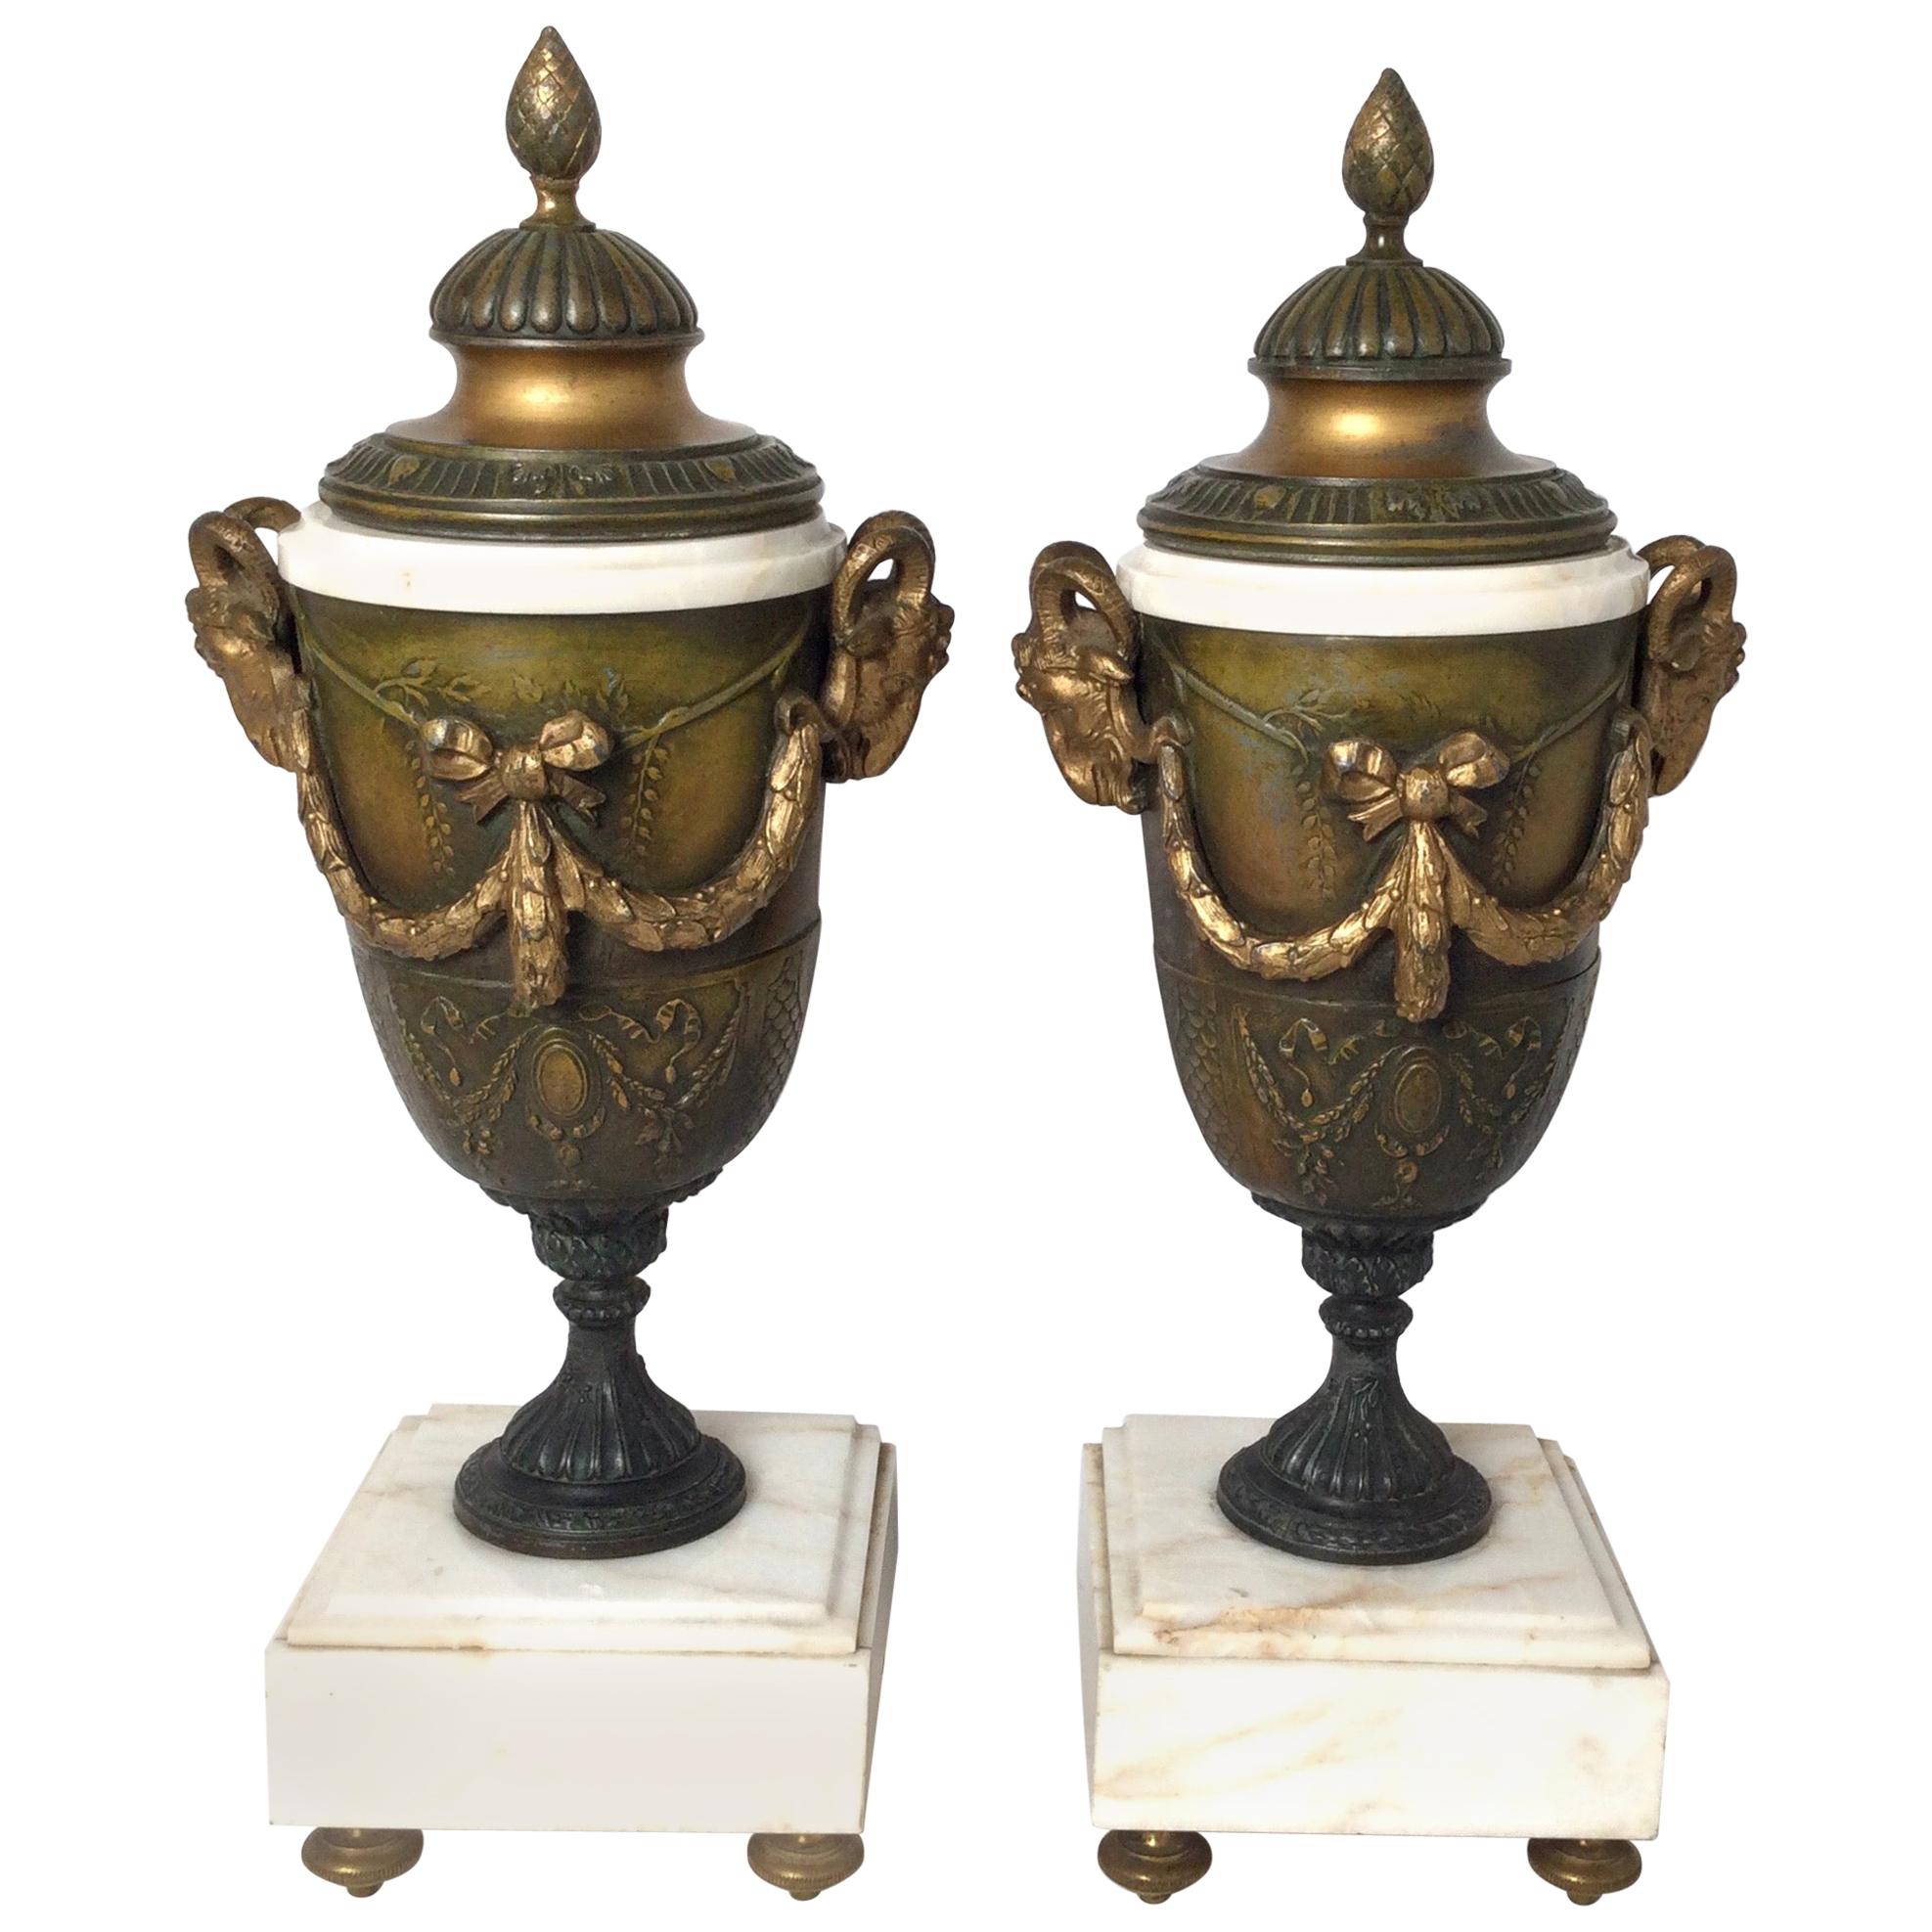 Pair of French Style Marble and Patinated Metal Garniture Urns with Rams Heads